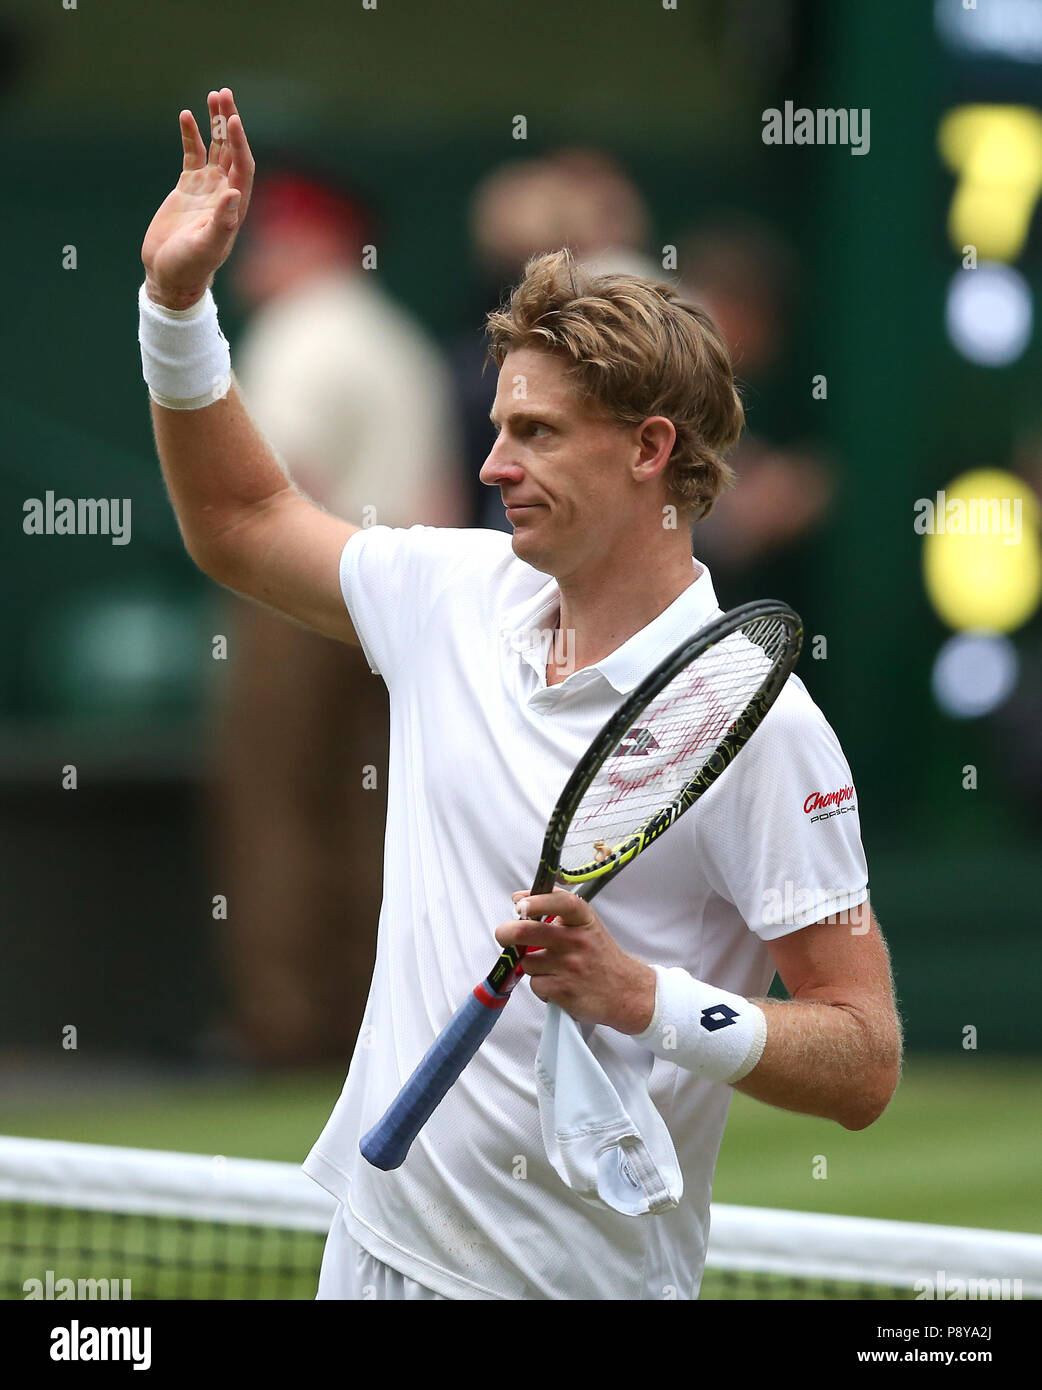 South African eighth seed Kevin Anderson celebrates having reached his first Wimbledon final, beating American ninth seed John Isner 7-6 (8/6) 6-7 (5/7) 6-7 (9/11) 6-4 26-24 in the longest semi-final in the tournamentâ€™s history on day eleven of the Wimbledon Championships at the All England Lawn Tennis and Croquet Club, Wimbledon. PRESS ASSOCIATION Photo. Picture date: Friday July 13, 2018. See PA story TENNIS Wimbledon. Photo credit should read: Steven Paston/PA Wire. RESTRICTIONS: Editorial use only. No commercial use without prior written consent of the AELTC. Still image use only - no mo Stock Photo